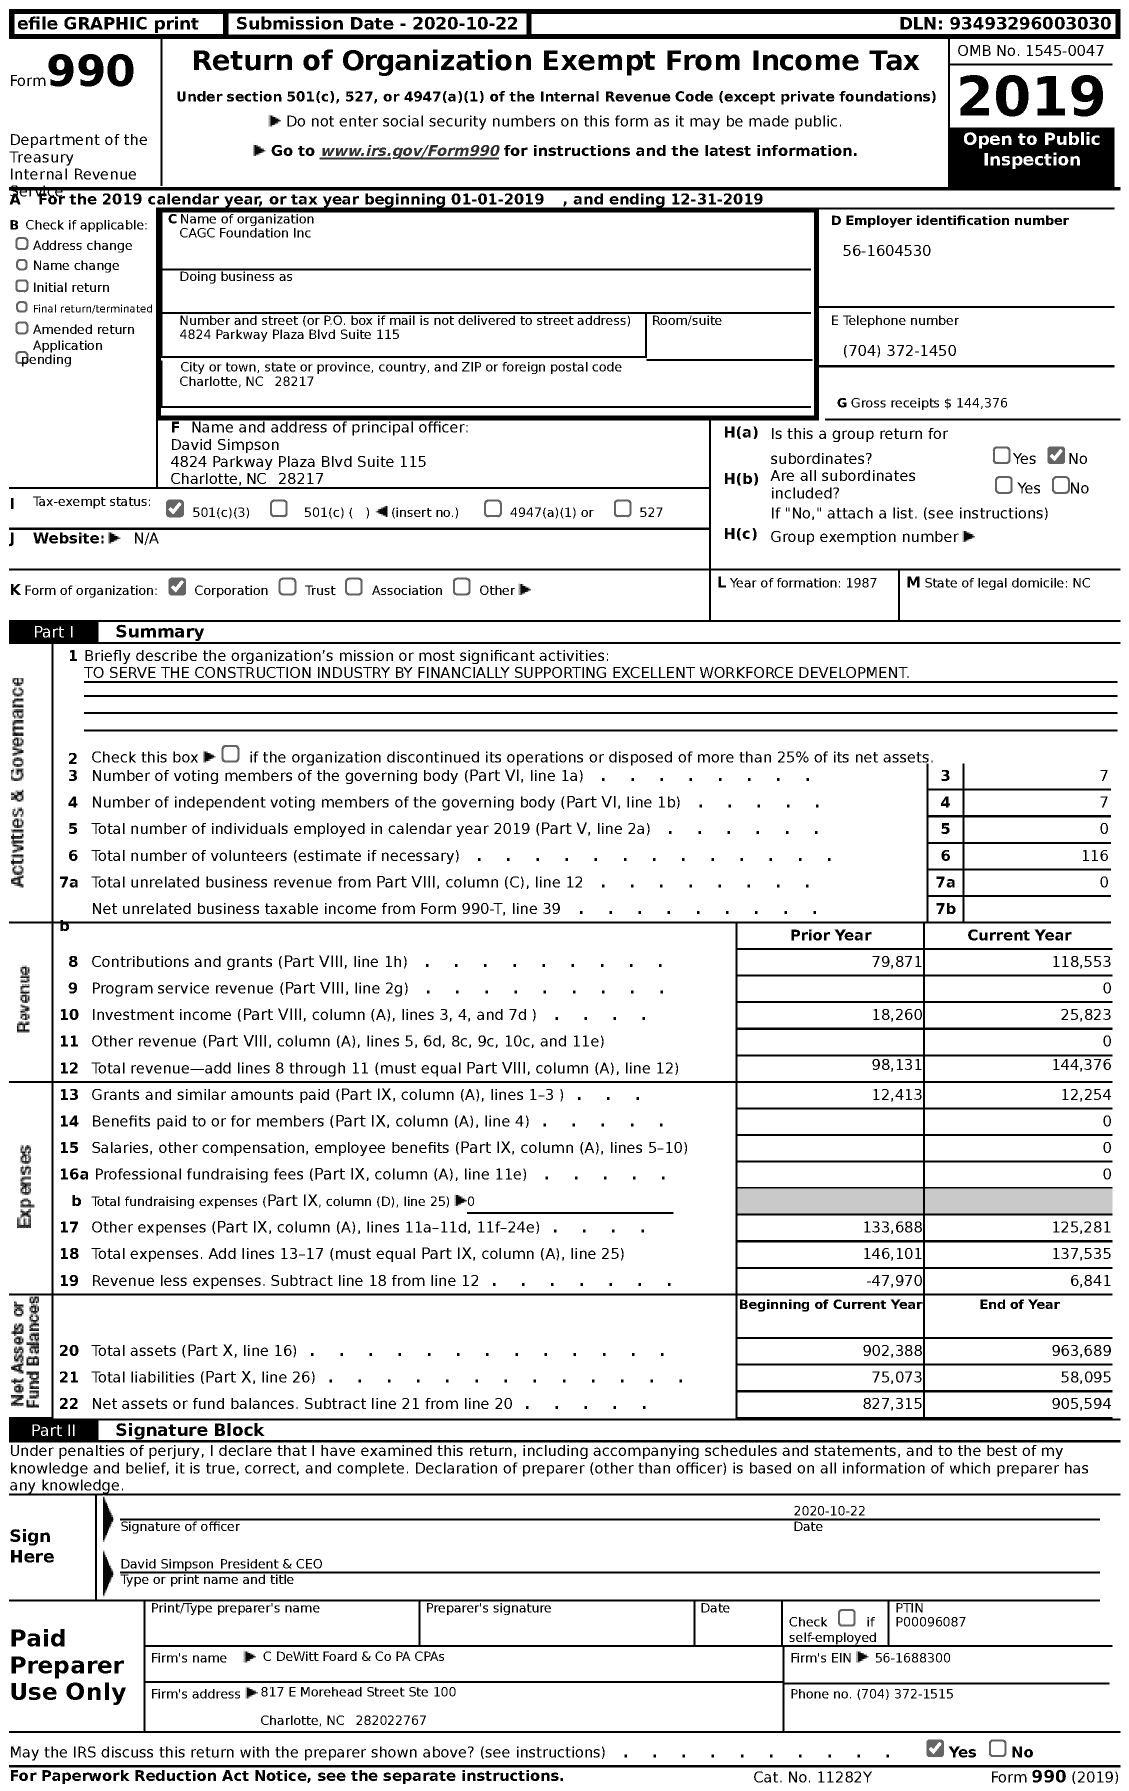 Image of first page of 2019 Form 990 for CAGC foundation